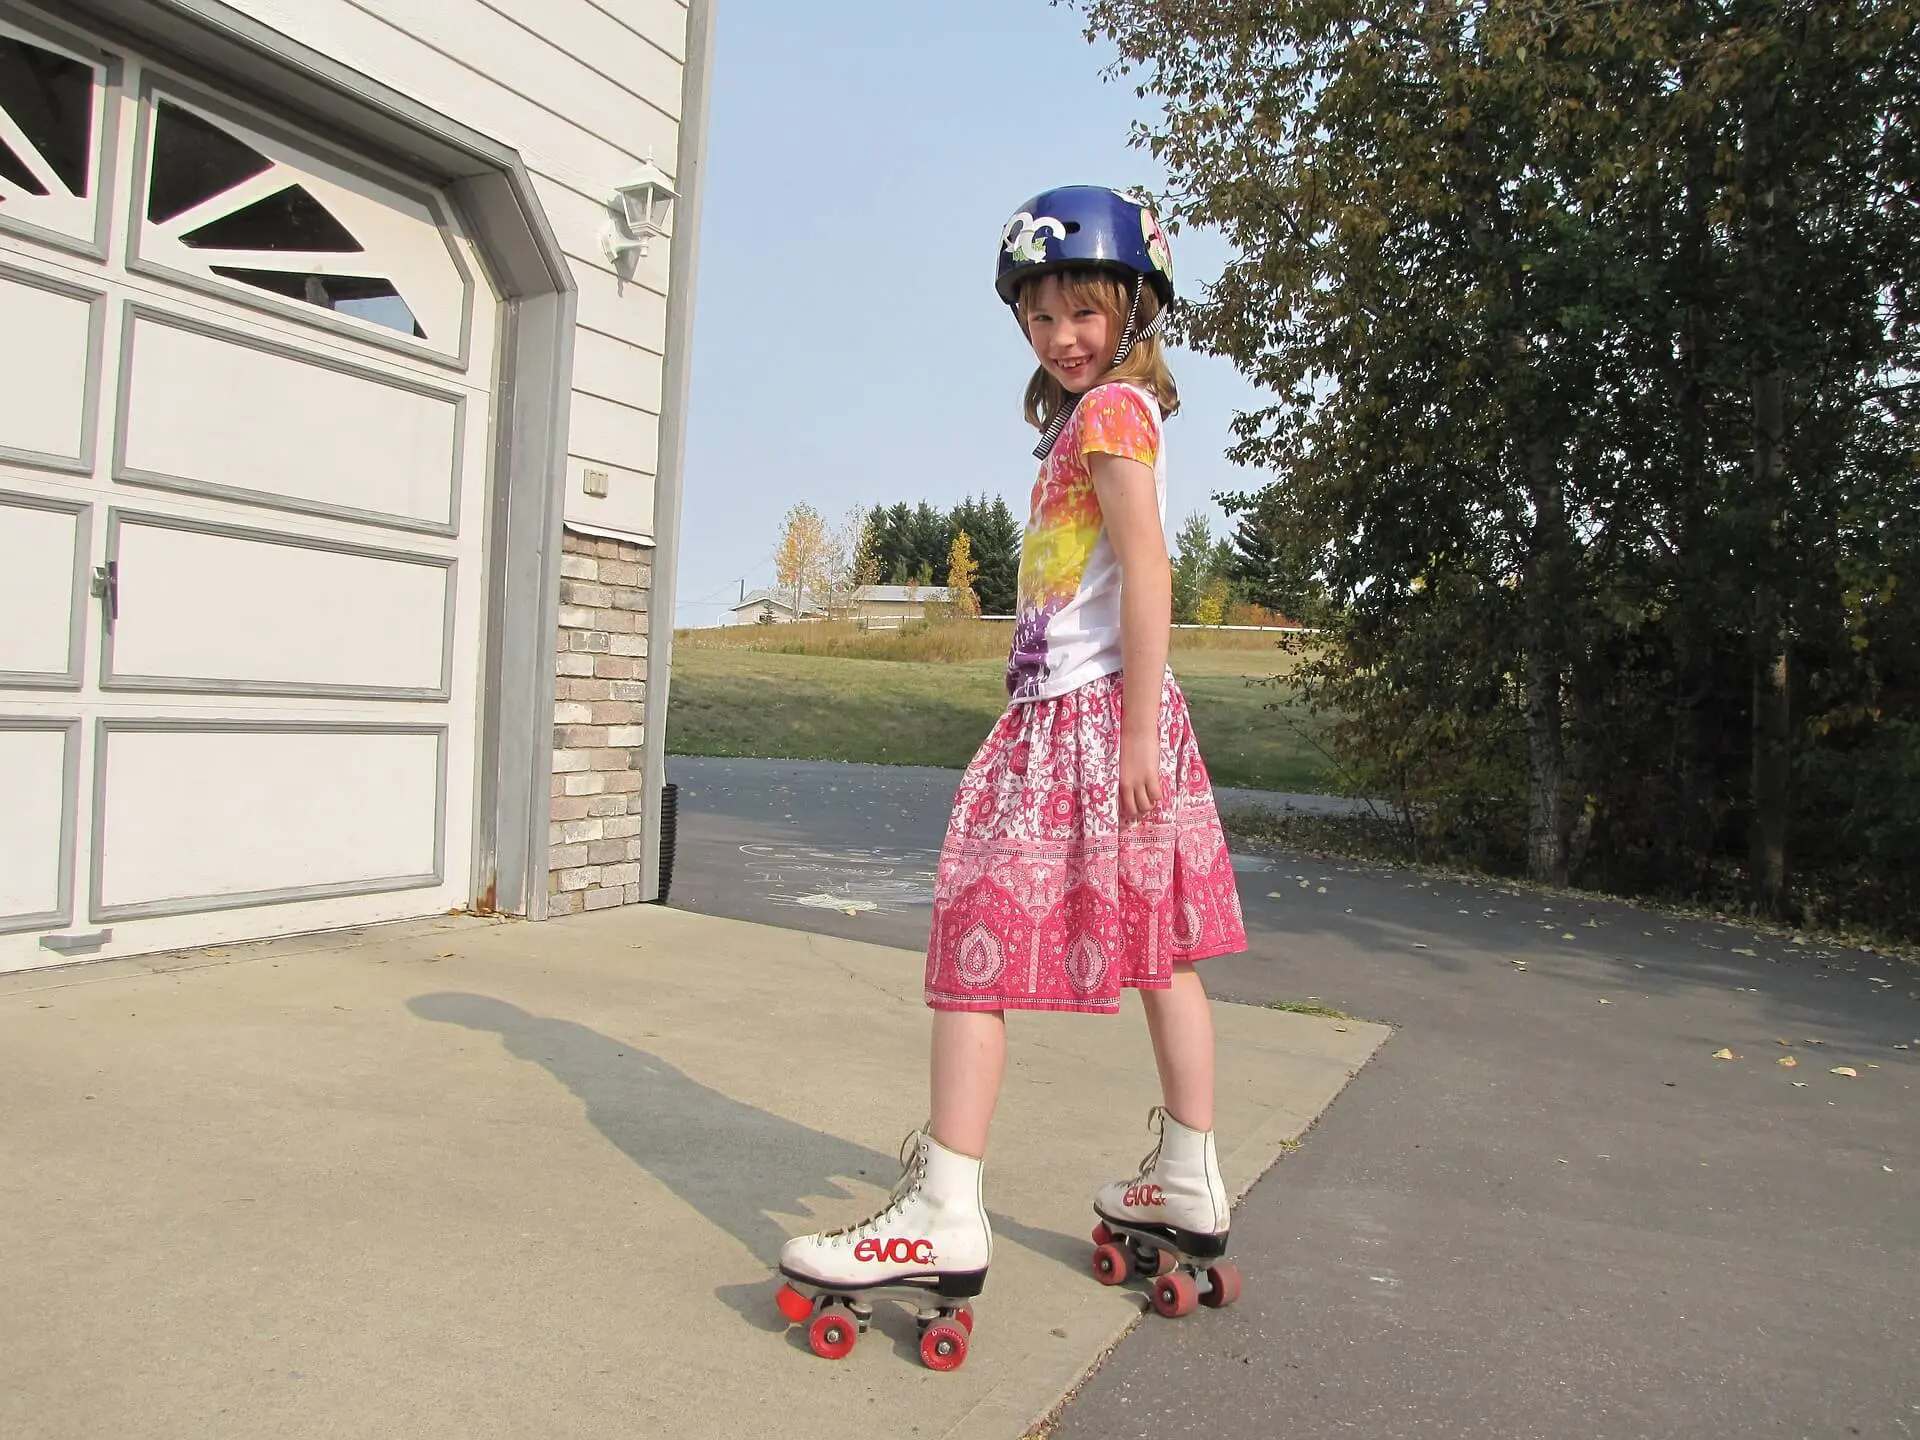 Tips for Teaching Your Child How to Roller Skate